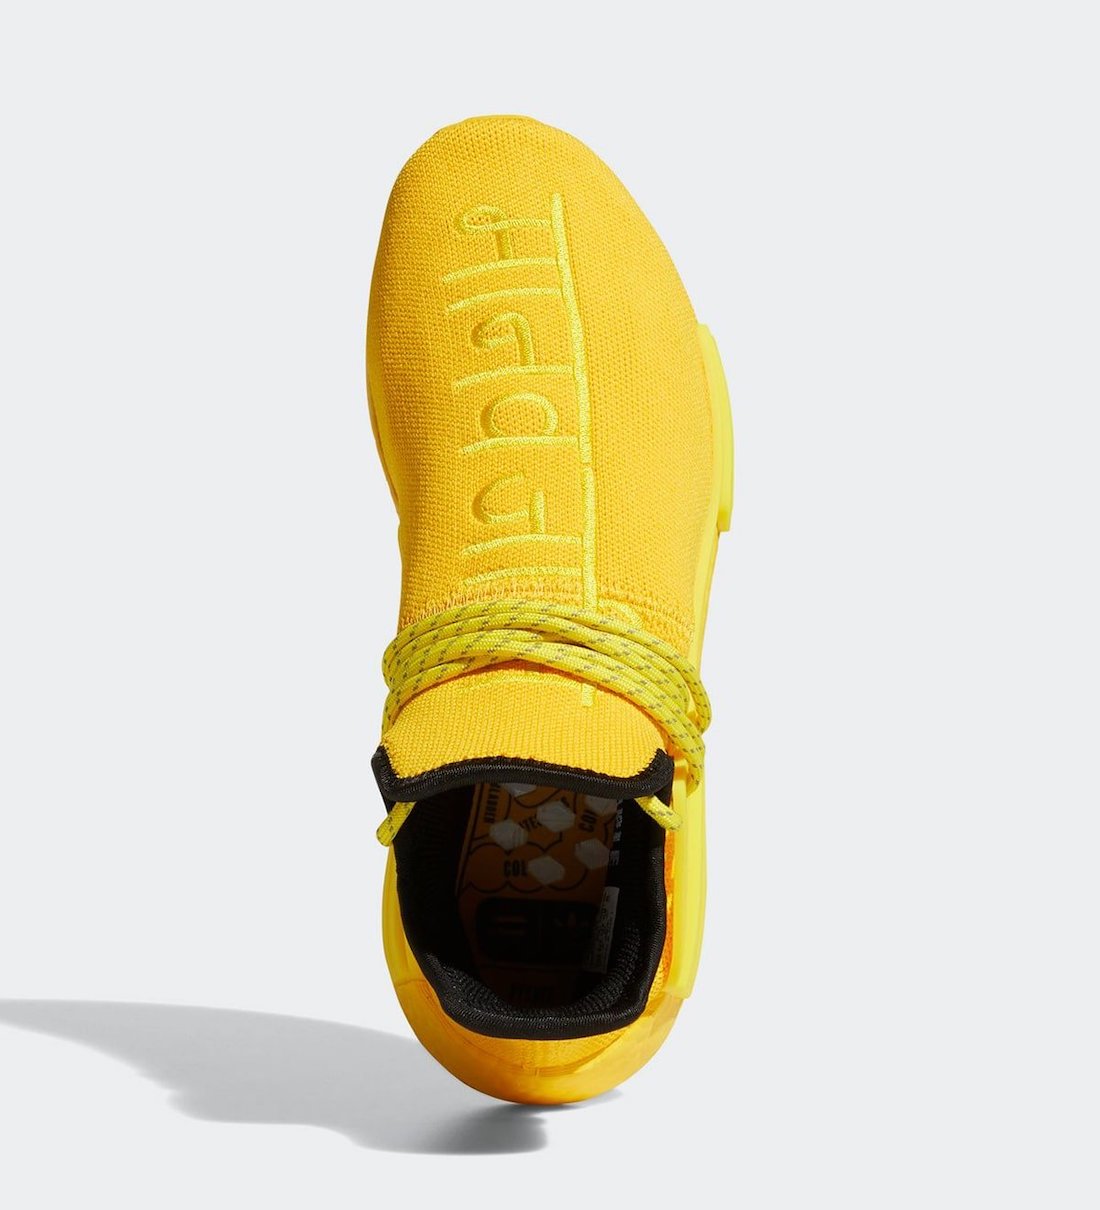 Pharrell adidas originals london to manchester gazelle 2017 Yellow GY0091 Release Date